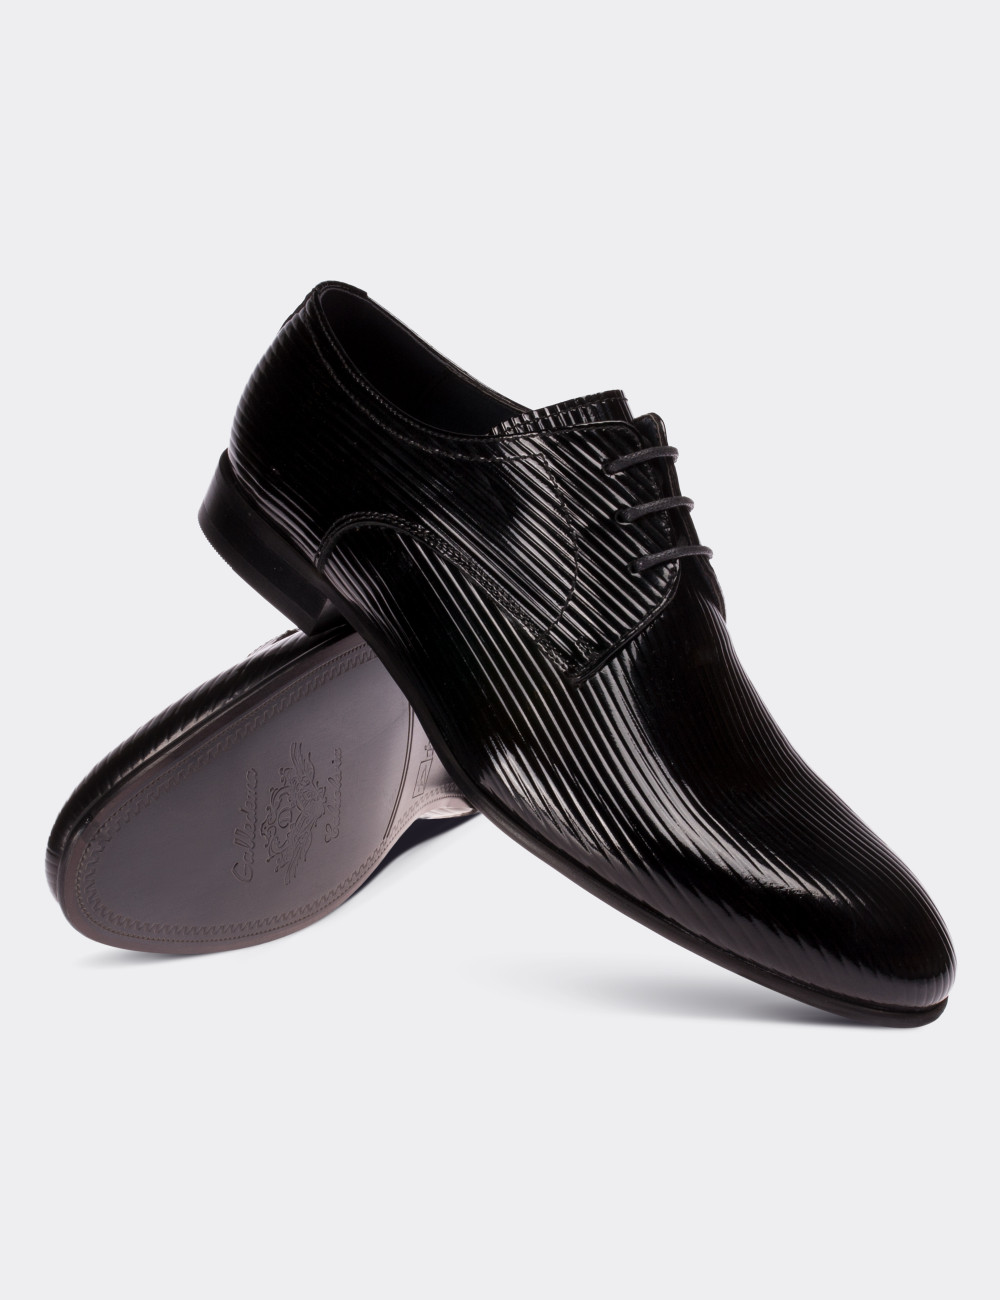 Black Patent Leather Classic Shoes - 00479MSYHM12